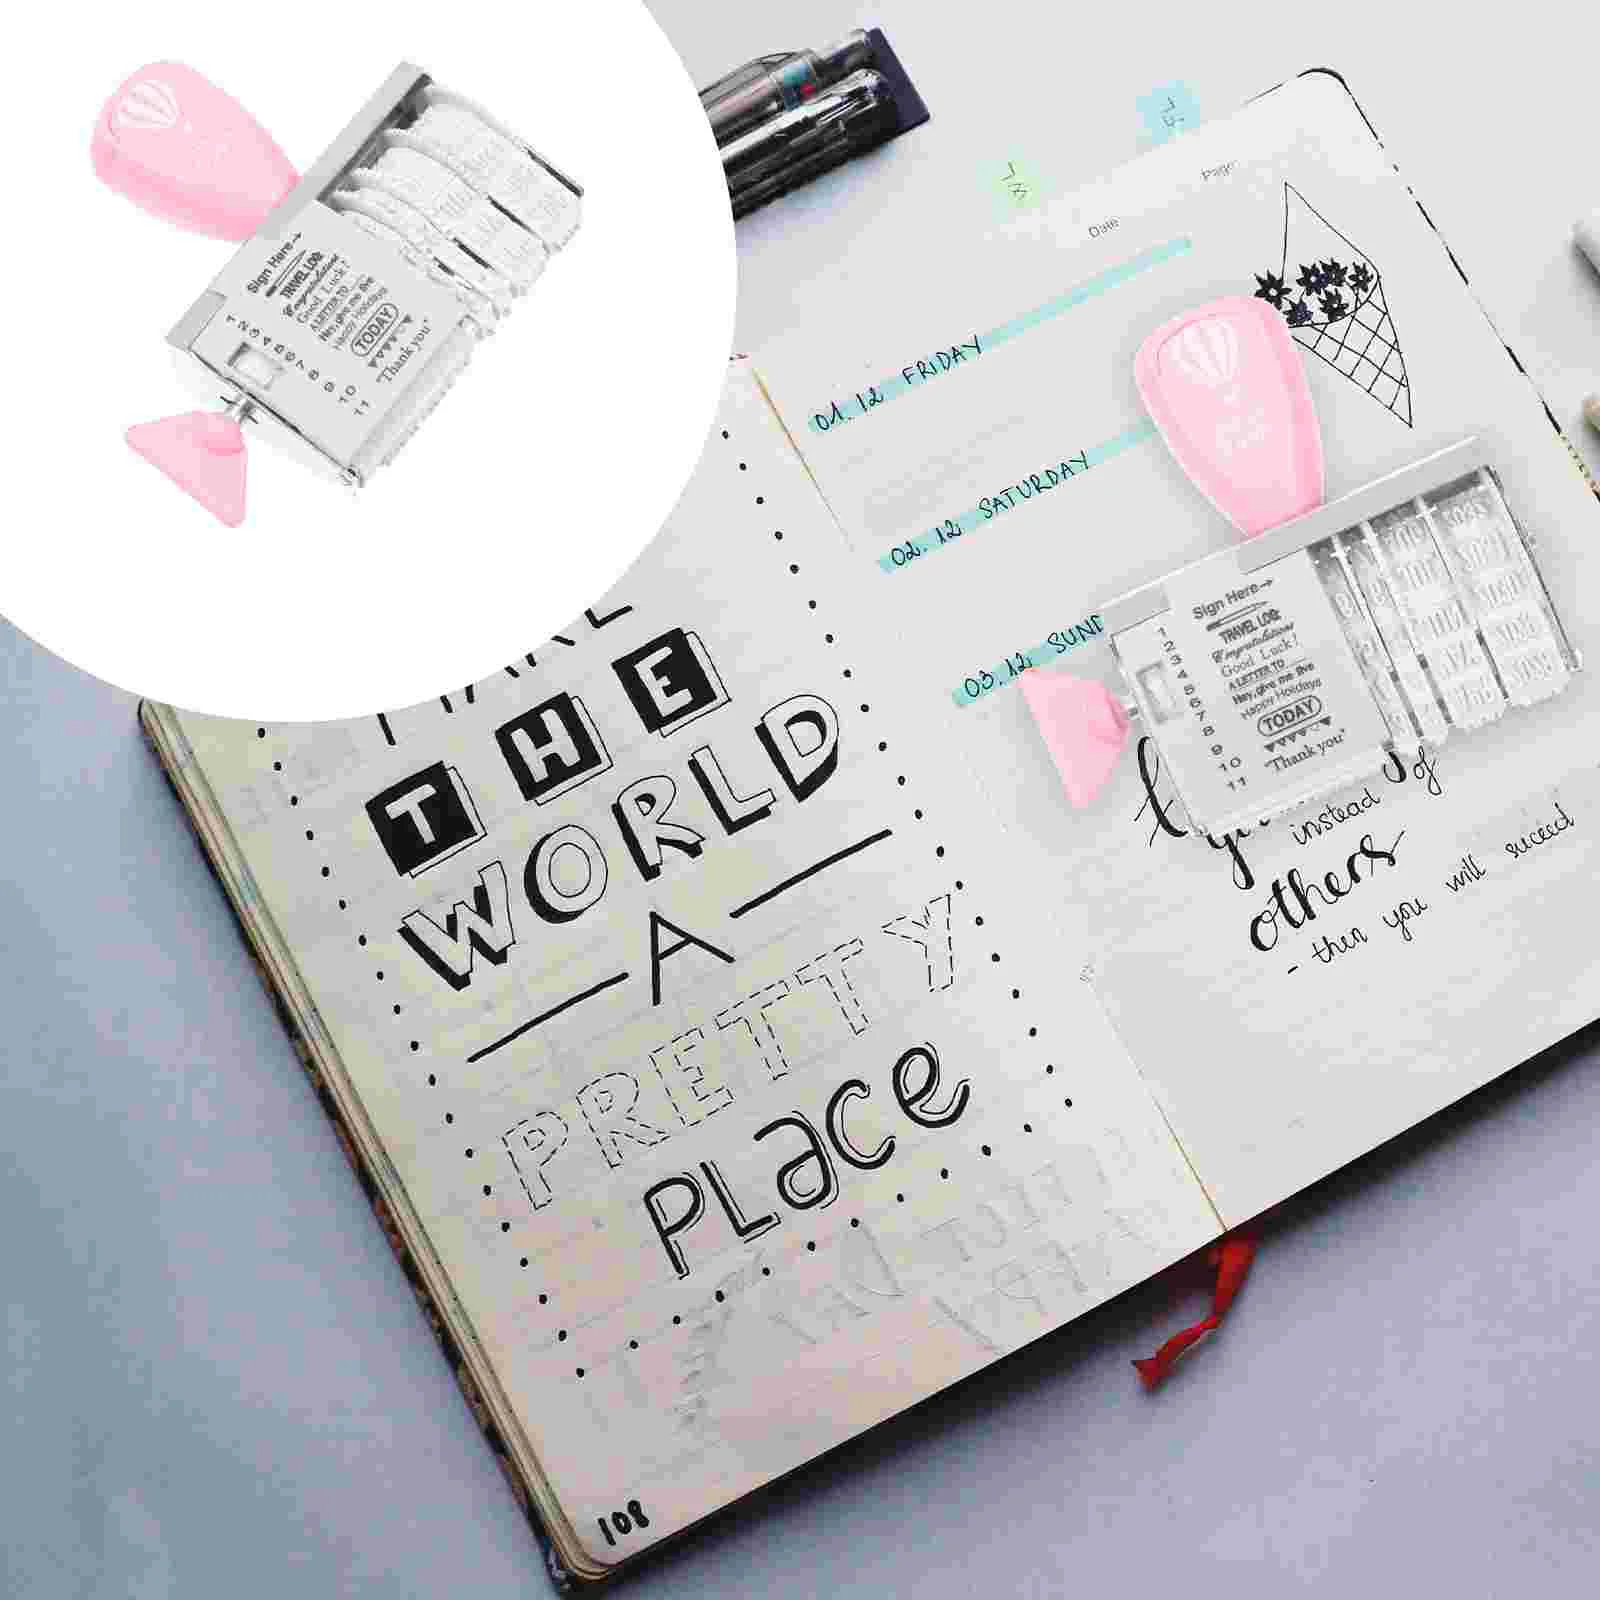 Seal Postage Stamps DIY Planner Knob Useful Date Plastic Rollers Scrapbook Supplies School Stationery 10pcs set kawaii masking tape with memo pads cartoon stationery stickers bunny bear school supplies diy scrapbook planner decor